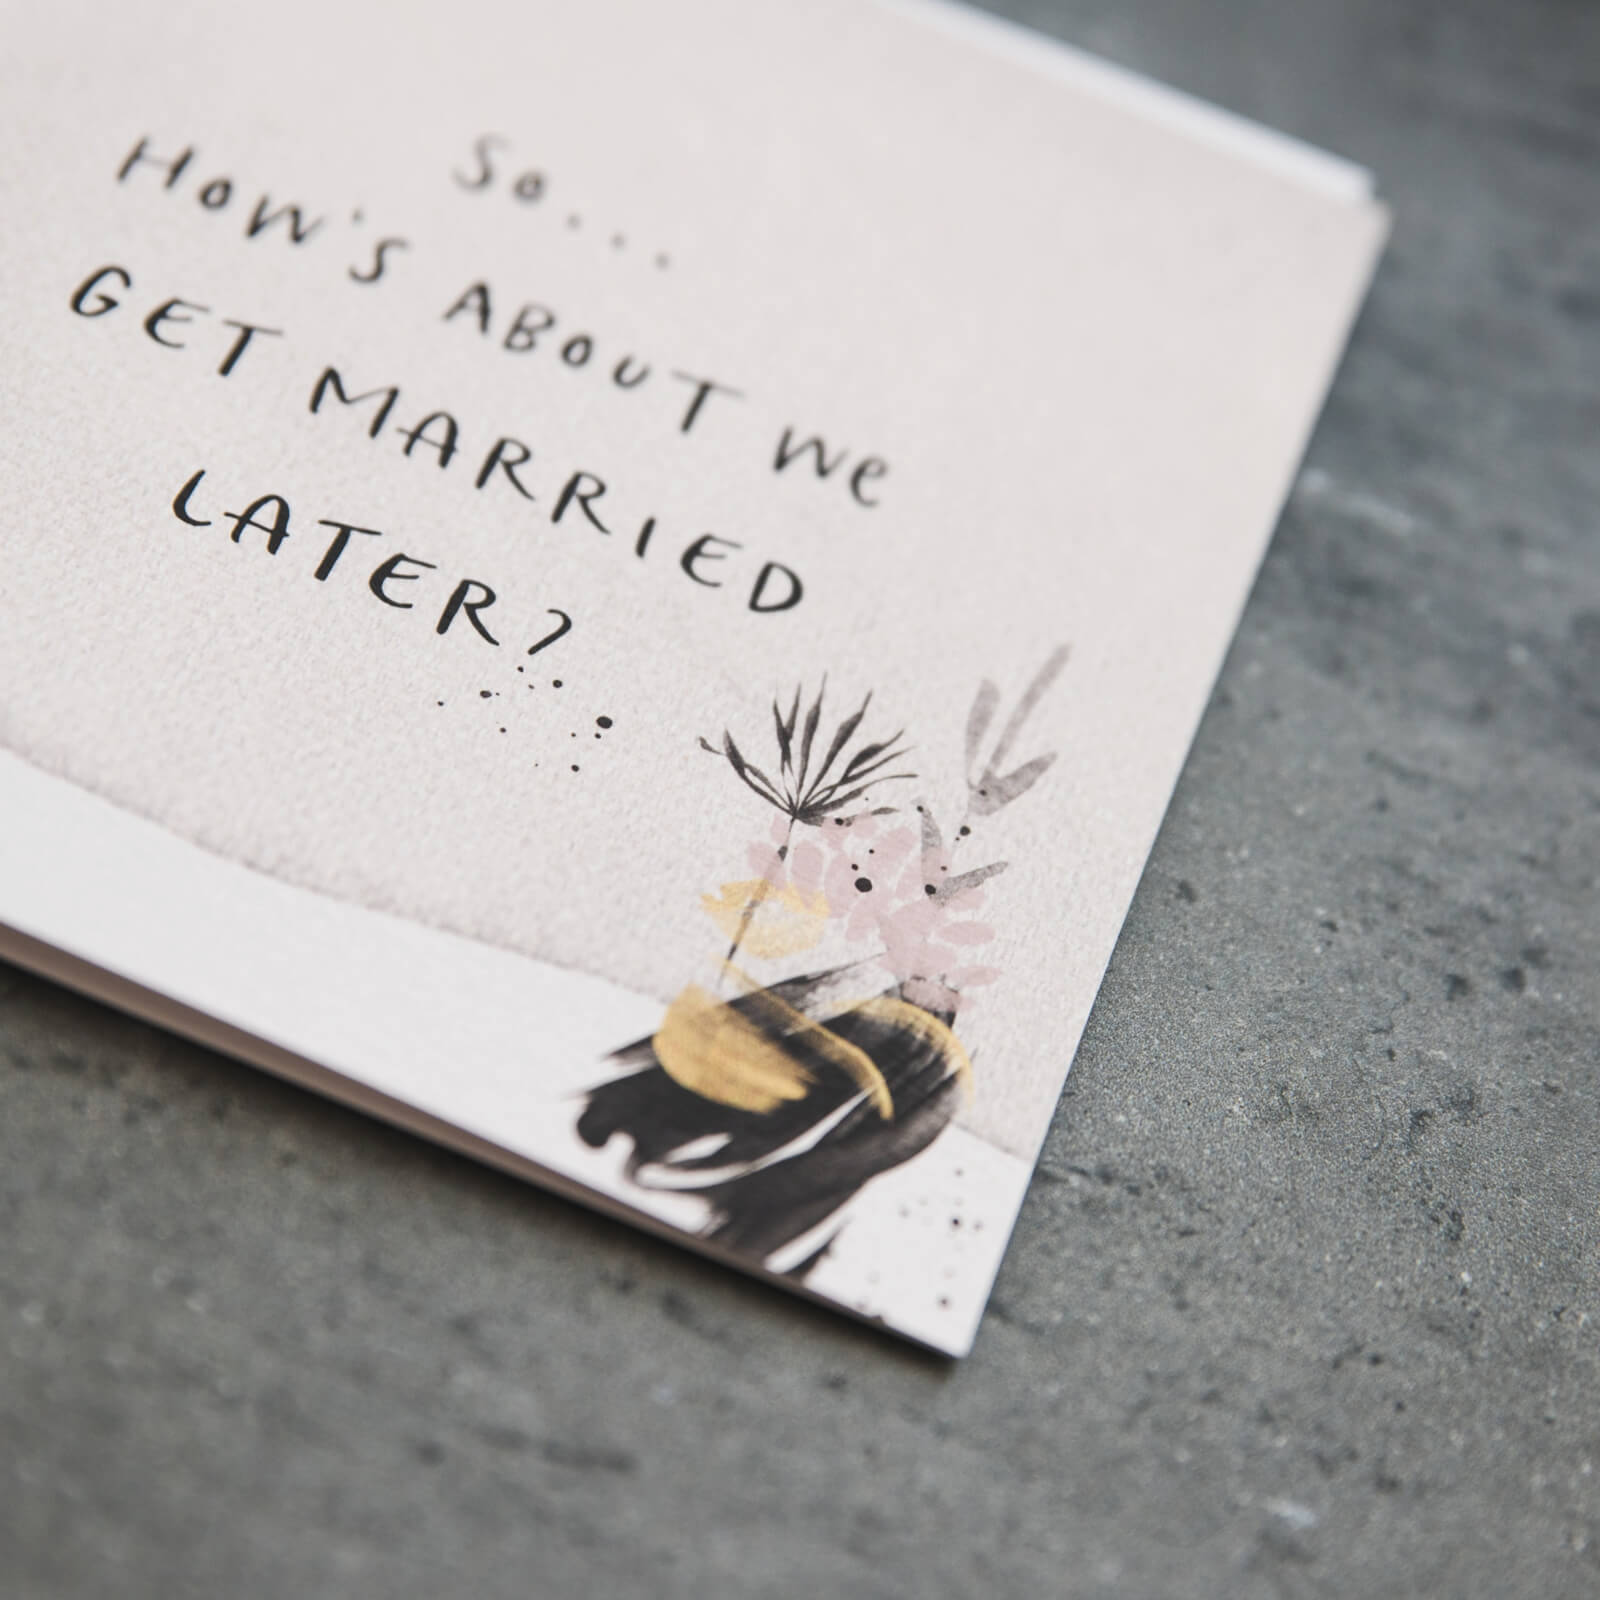 'Get Married Later?' Funny Wedding Day Card - I am Nat Ltd - Greeting Card